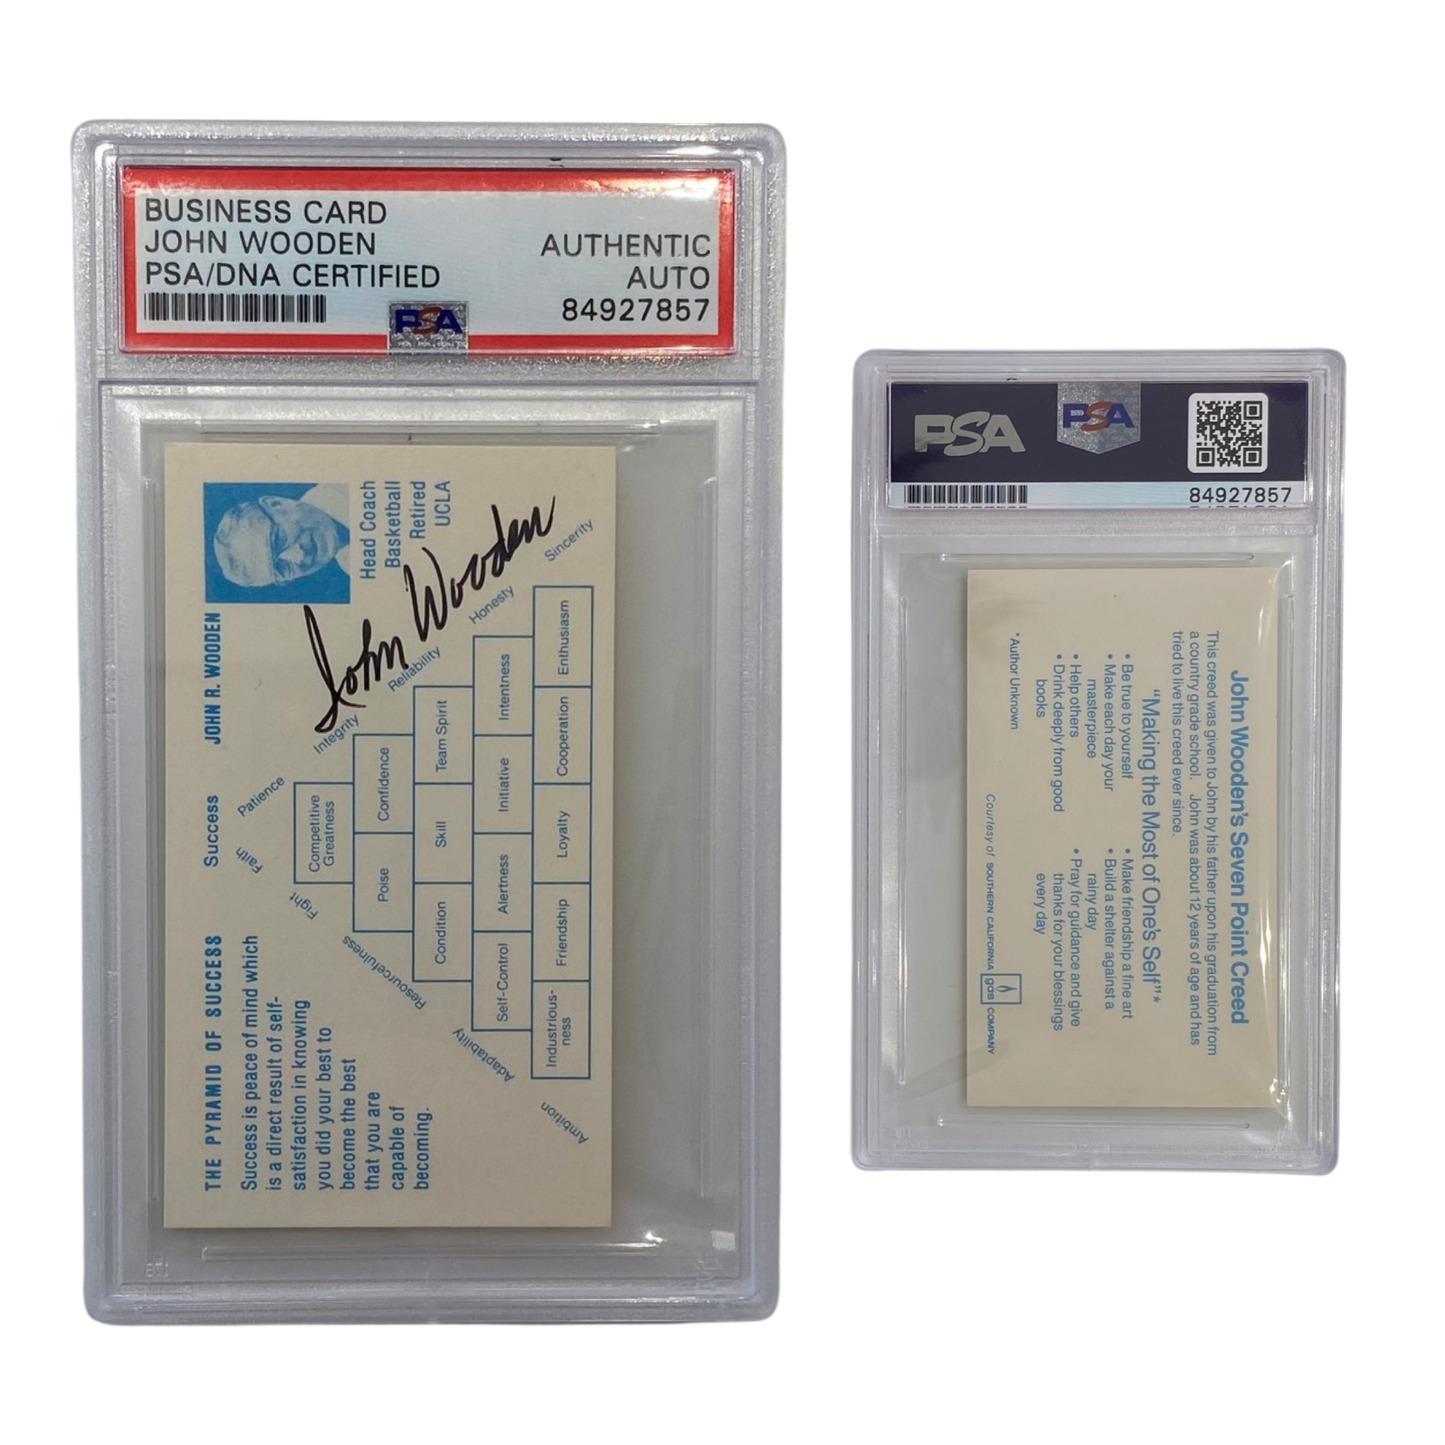 1975 John Wooden Pyramid Of Success Business Card PSA Auto Authentic